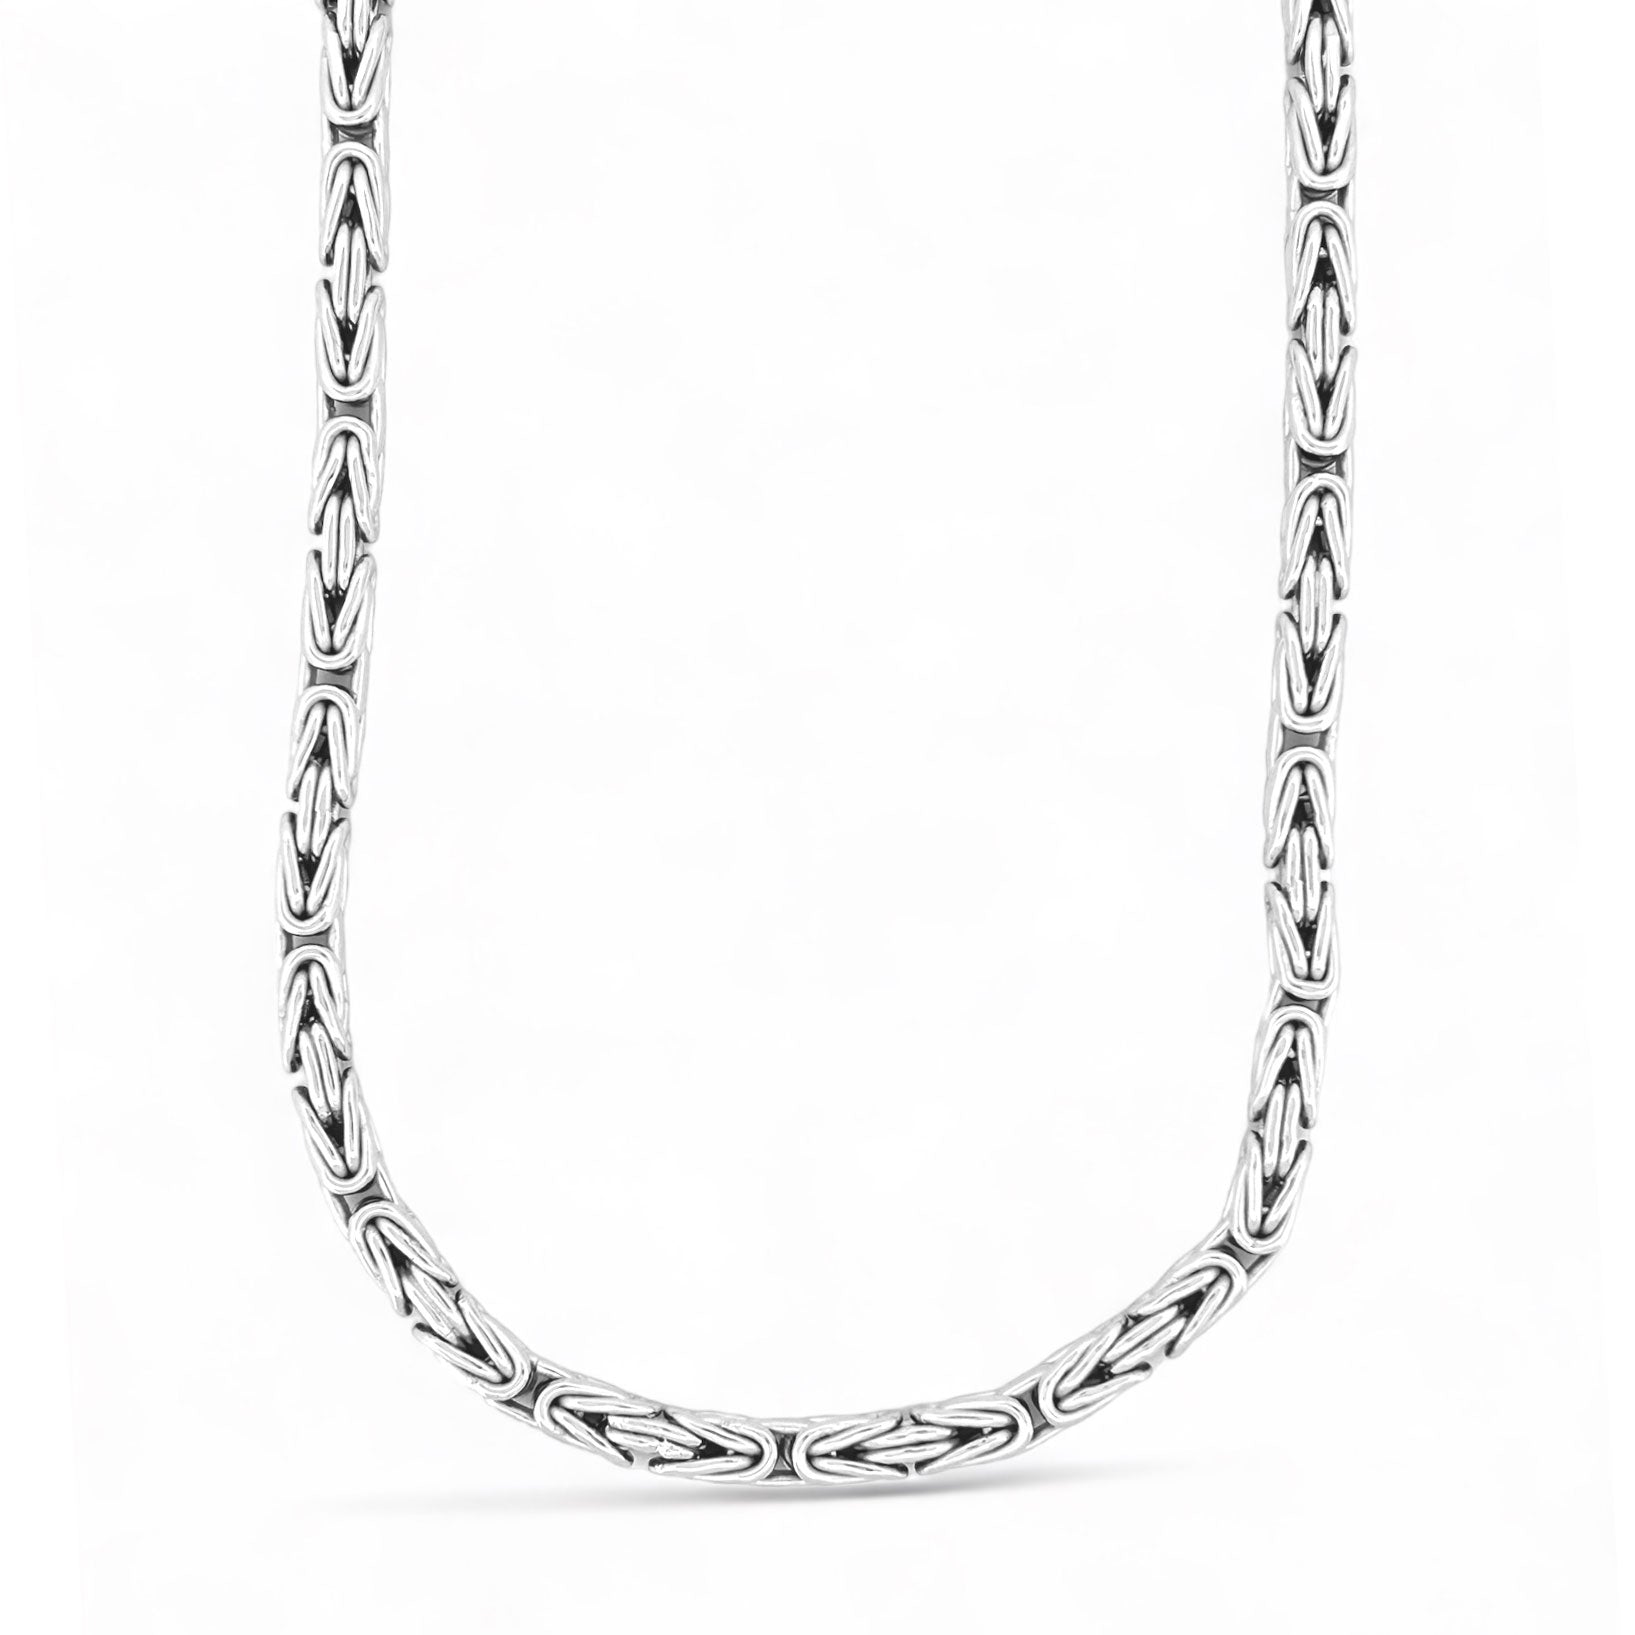 King's chain square 5mm - 925 silver